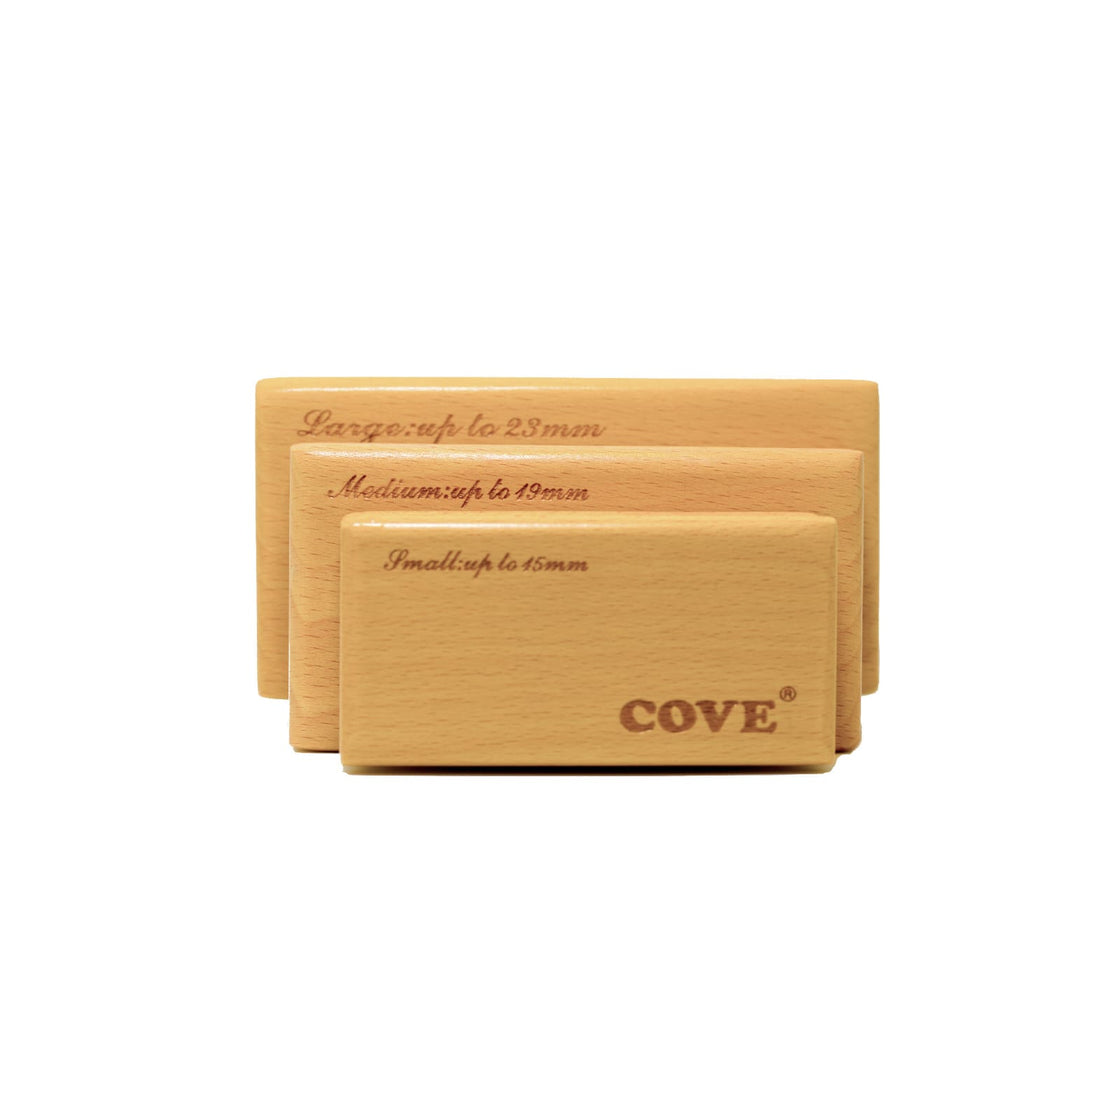 COVE Magnet Cleaner (M)